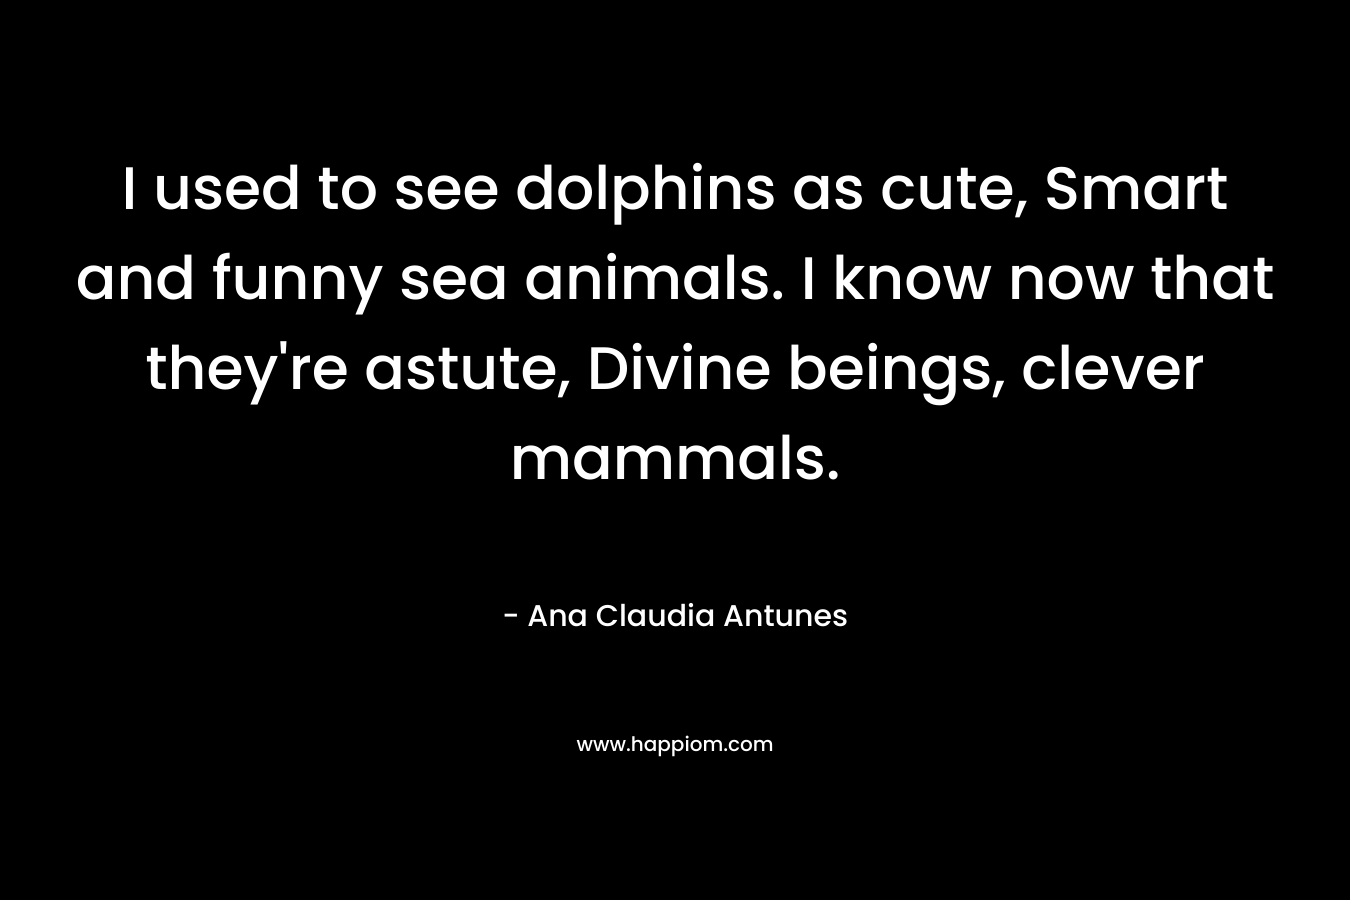 I used to see dolphins as cute, Smart and funny sea animals. I know now that they’re astute, Divine beings, clever mammals. – Ana Claudia Antunes